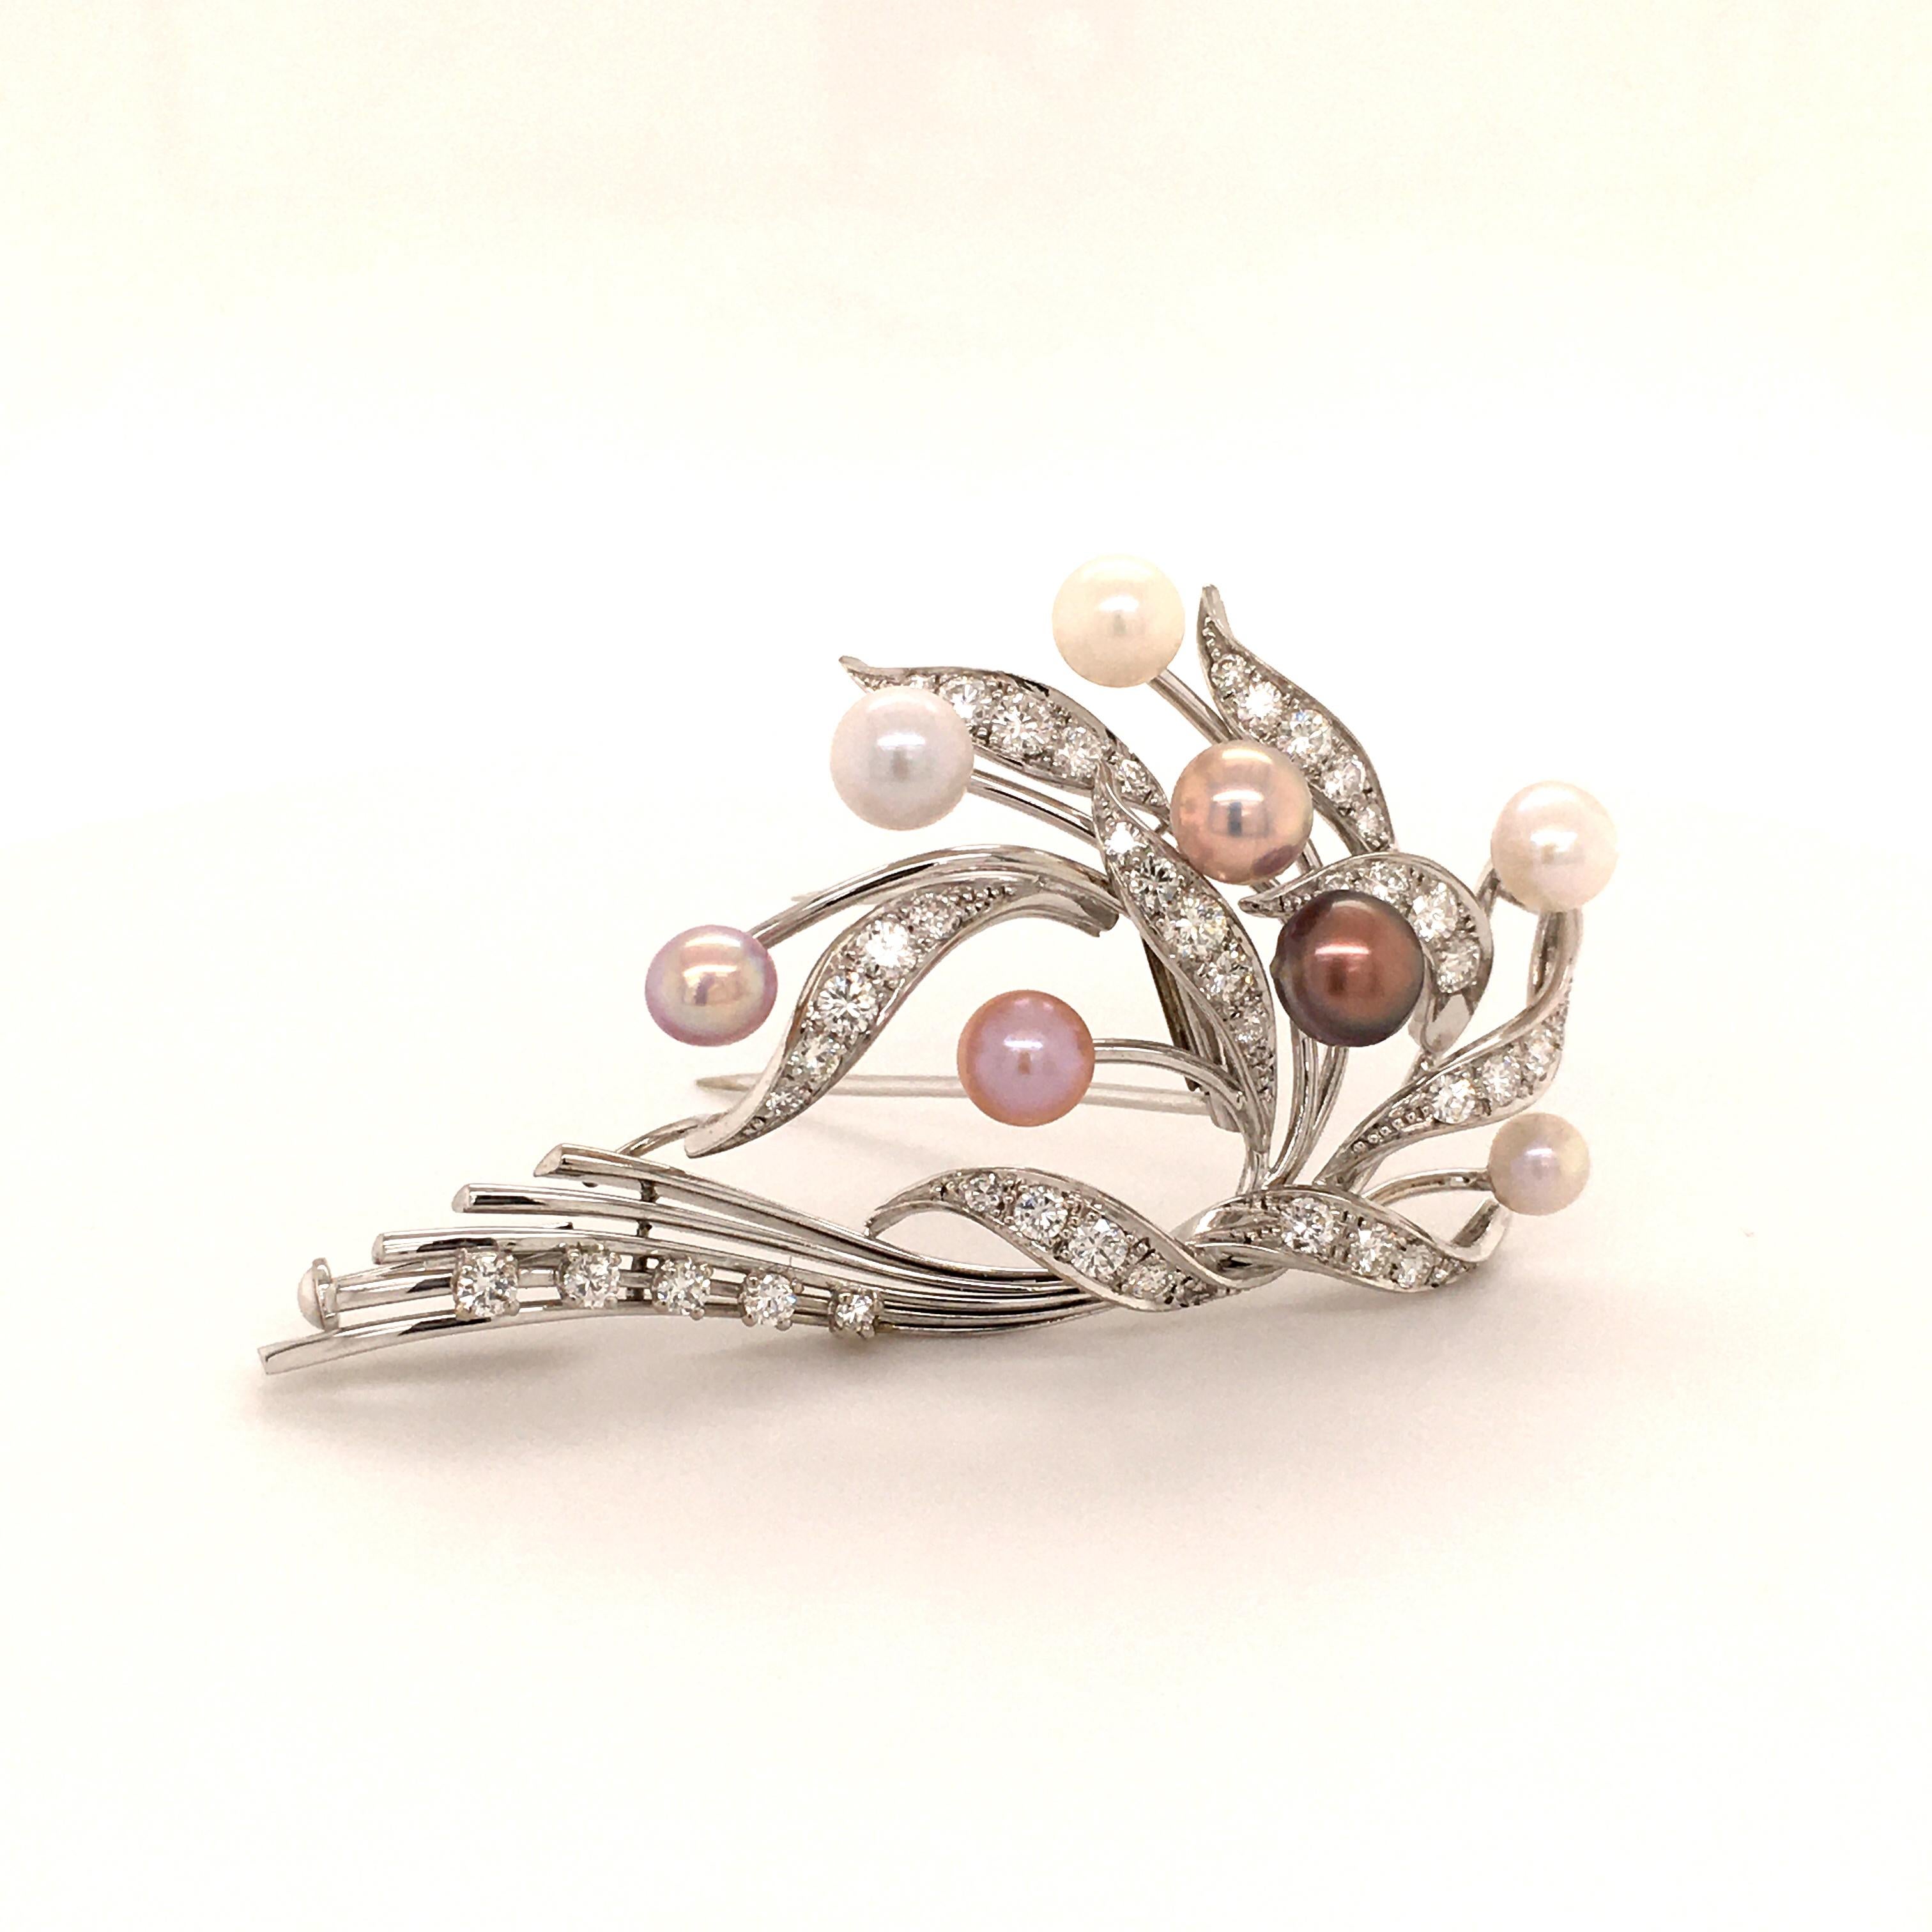 This elegant brooch features eight natural pearls with colors ranging from white to light pink and purple. Mounting in 18 karat white gold, set with 43 brilliant cut diamonds of F/G color and vs clarity, total weight 1.25 carats.
Excellent